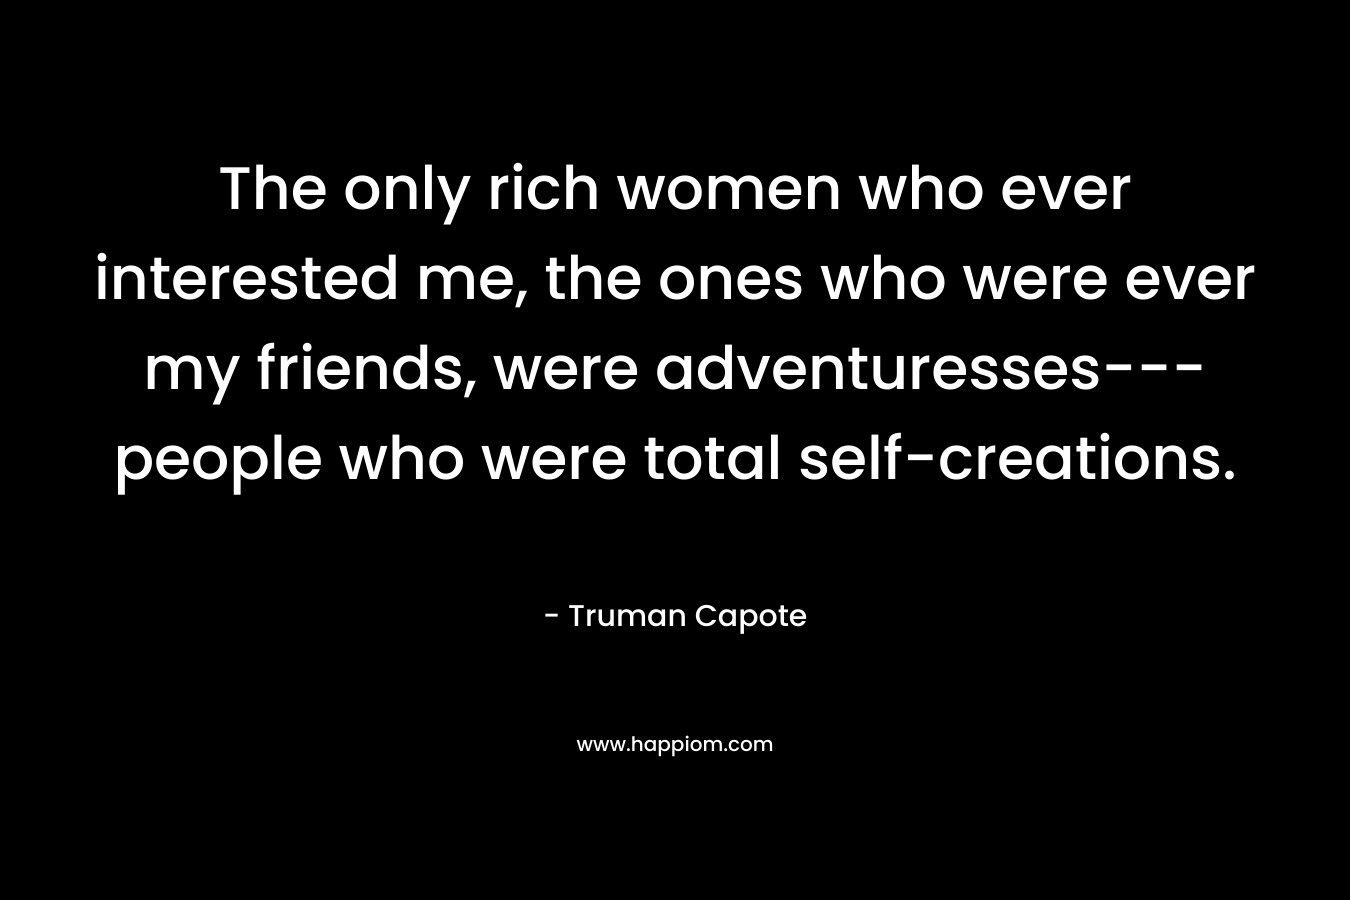 The only rich women who ever interested me, the ones who were ever my friends, were adventuresses---people who were total self-creations.